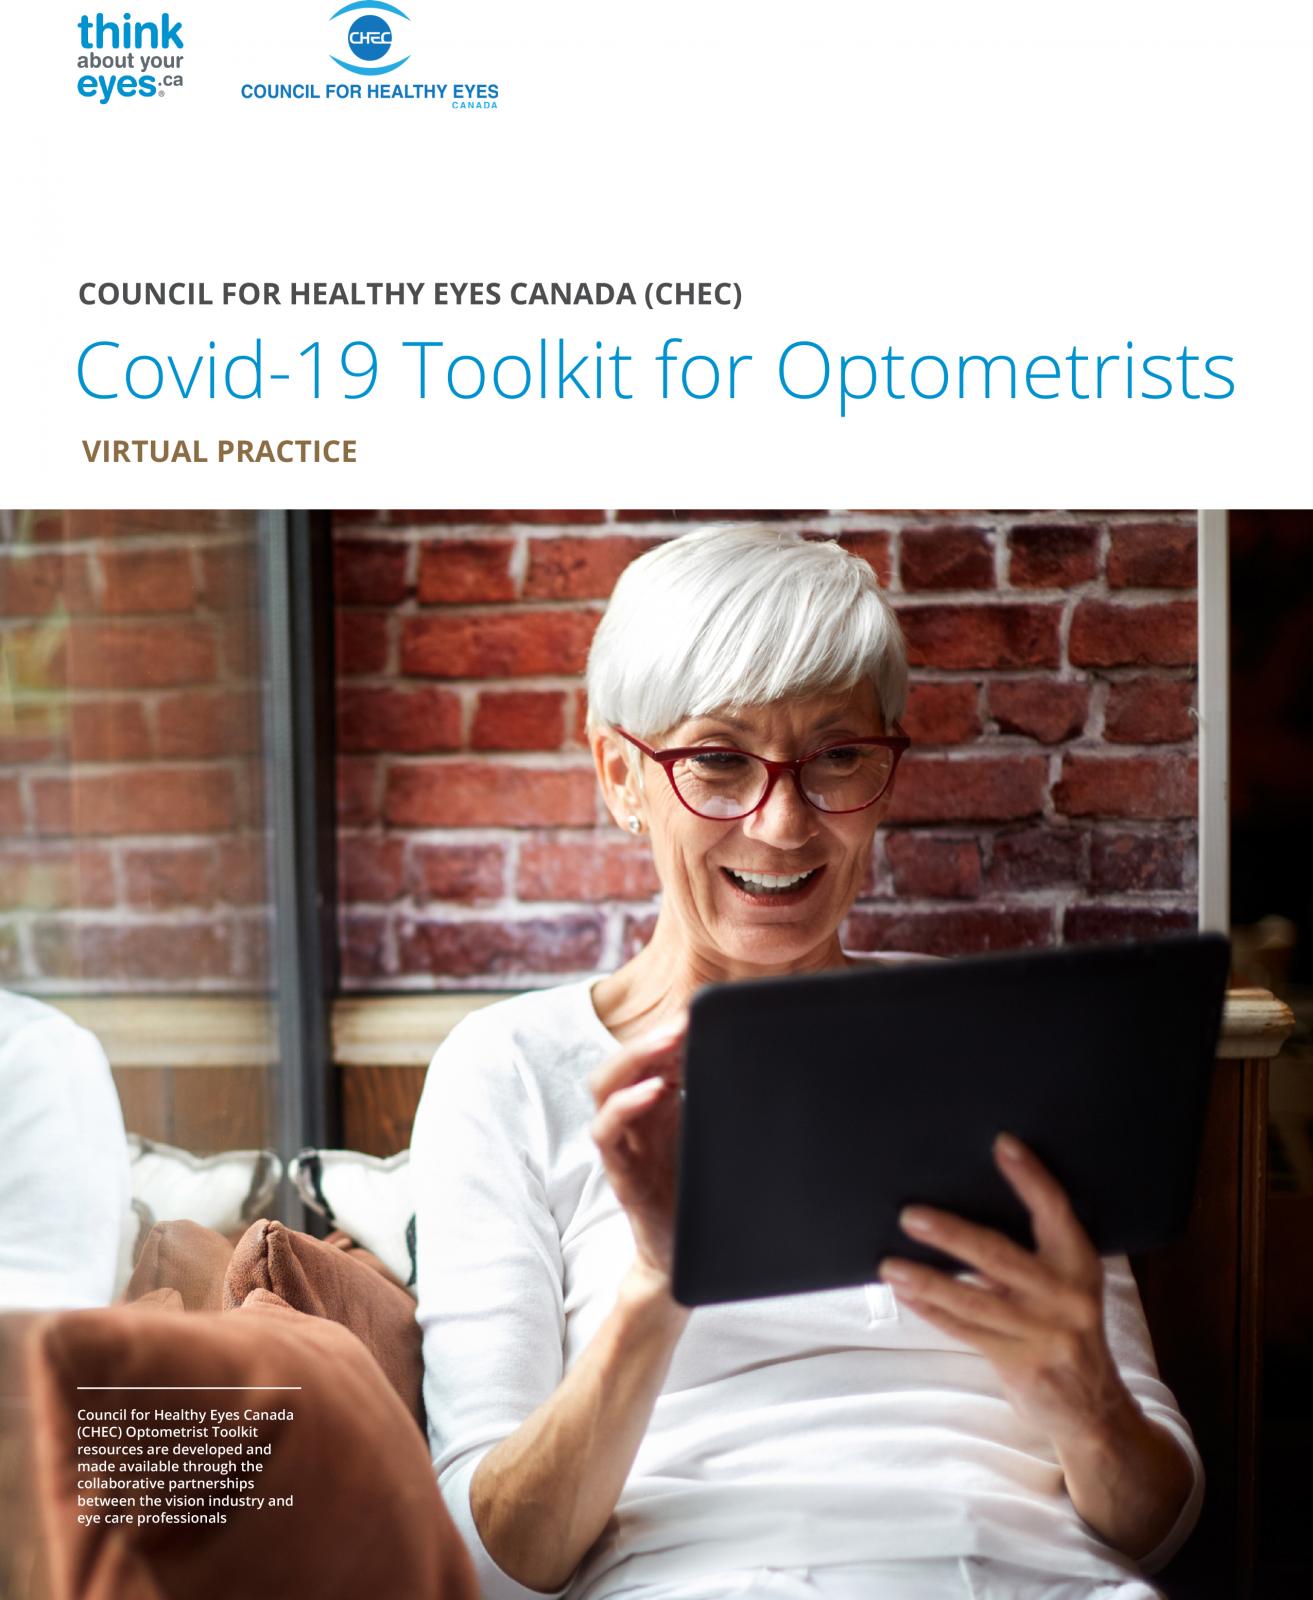 Covid-19 Toolkit for Optometrists - VIRTUAL PRACTICE